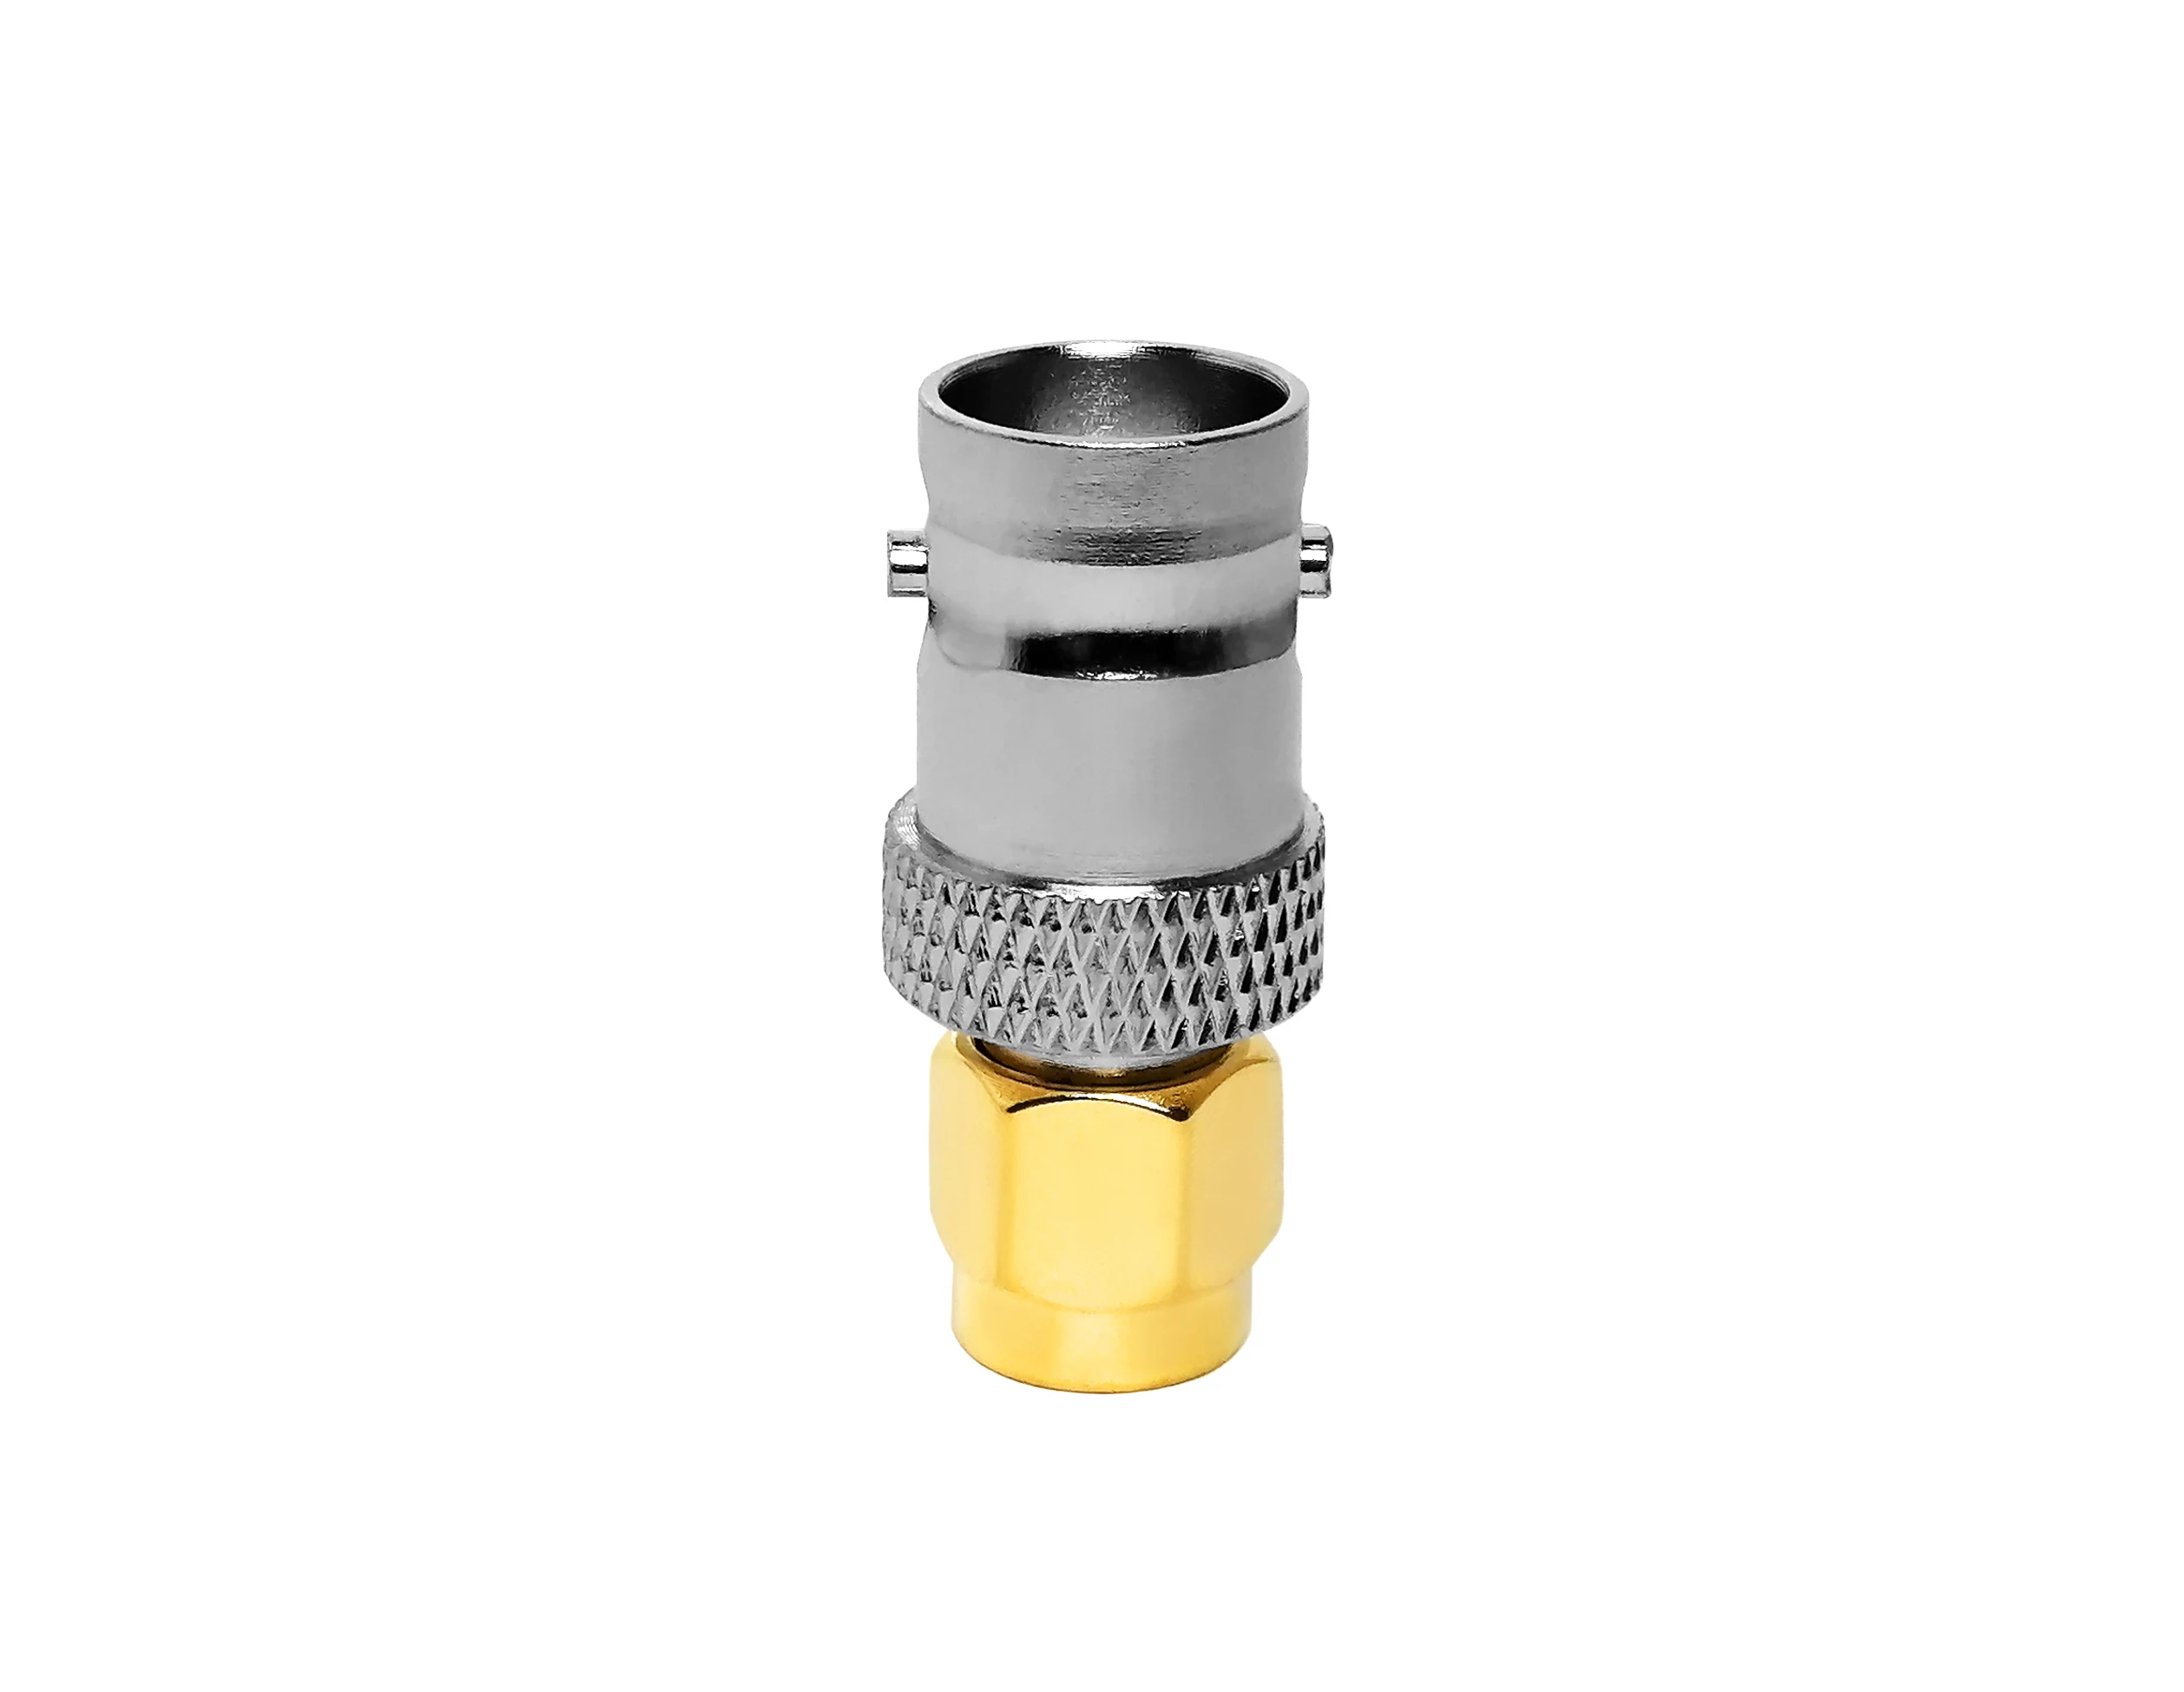 Adaptor Reverse polarity sma female jack to bnc male plug rf coaxial connector adapter manufacture